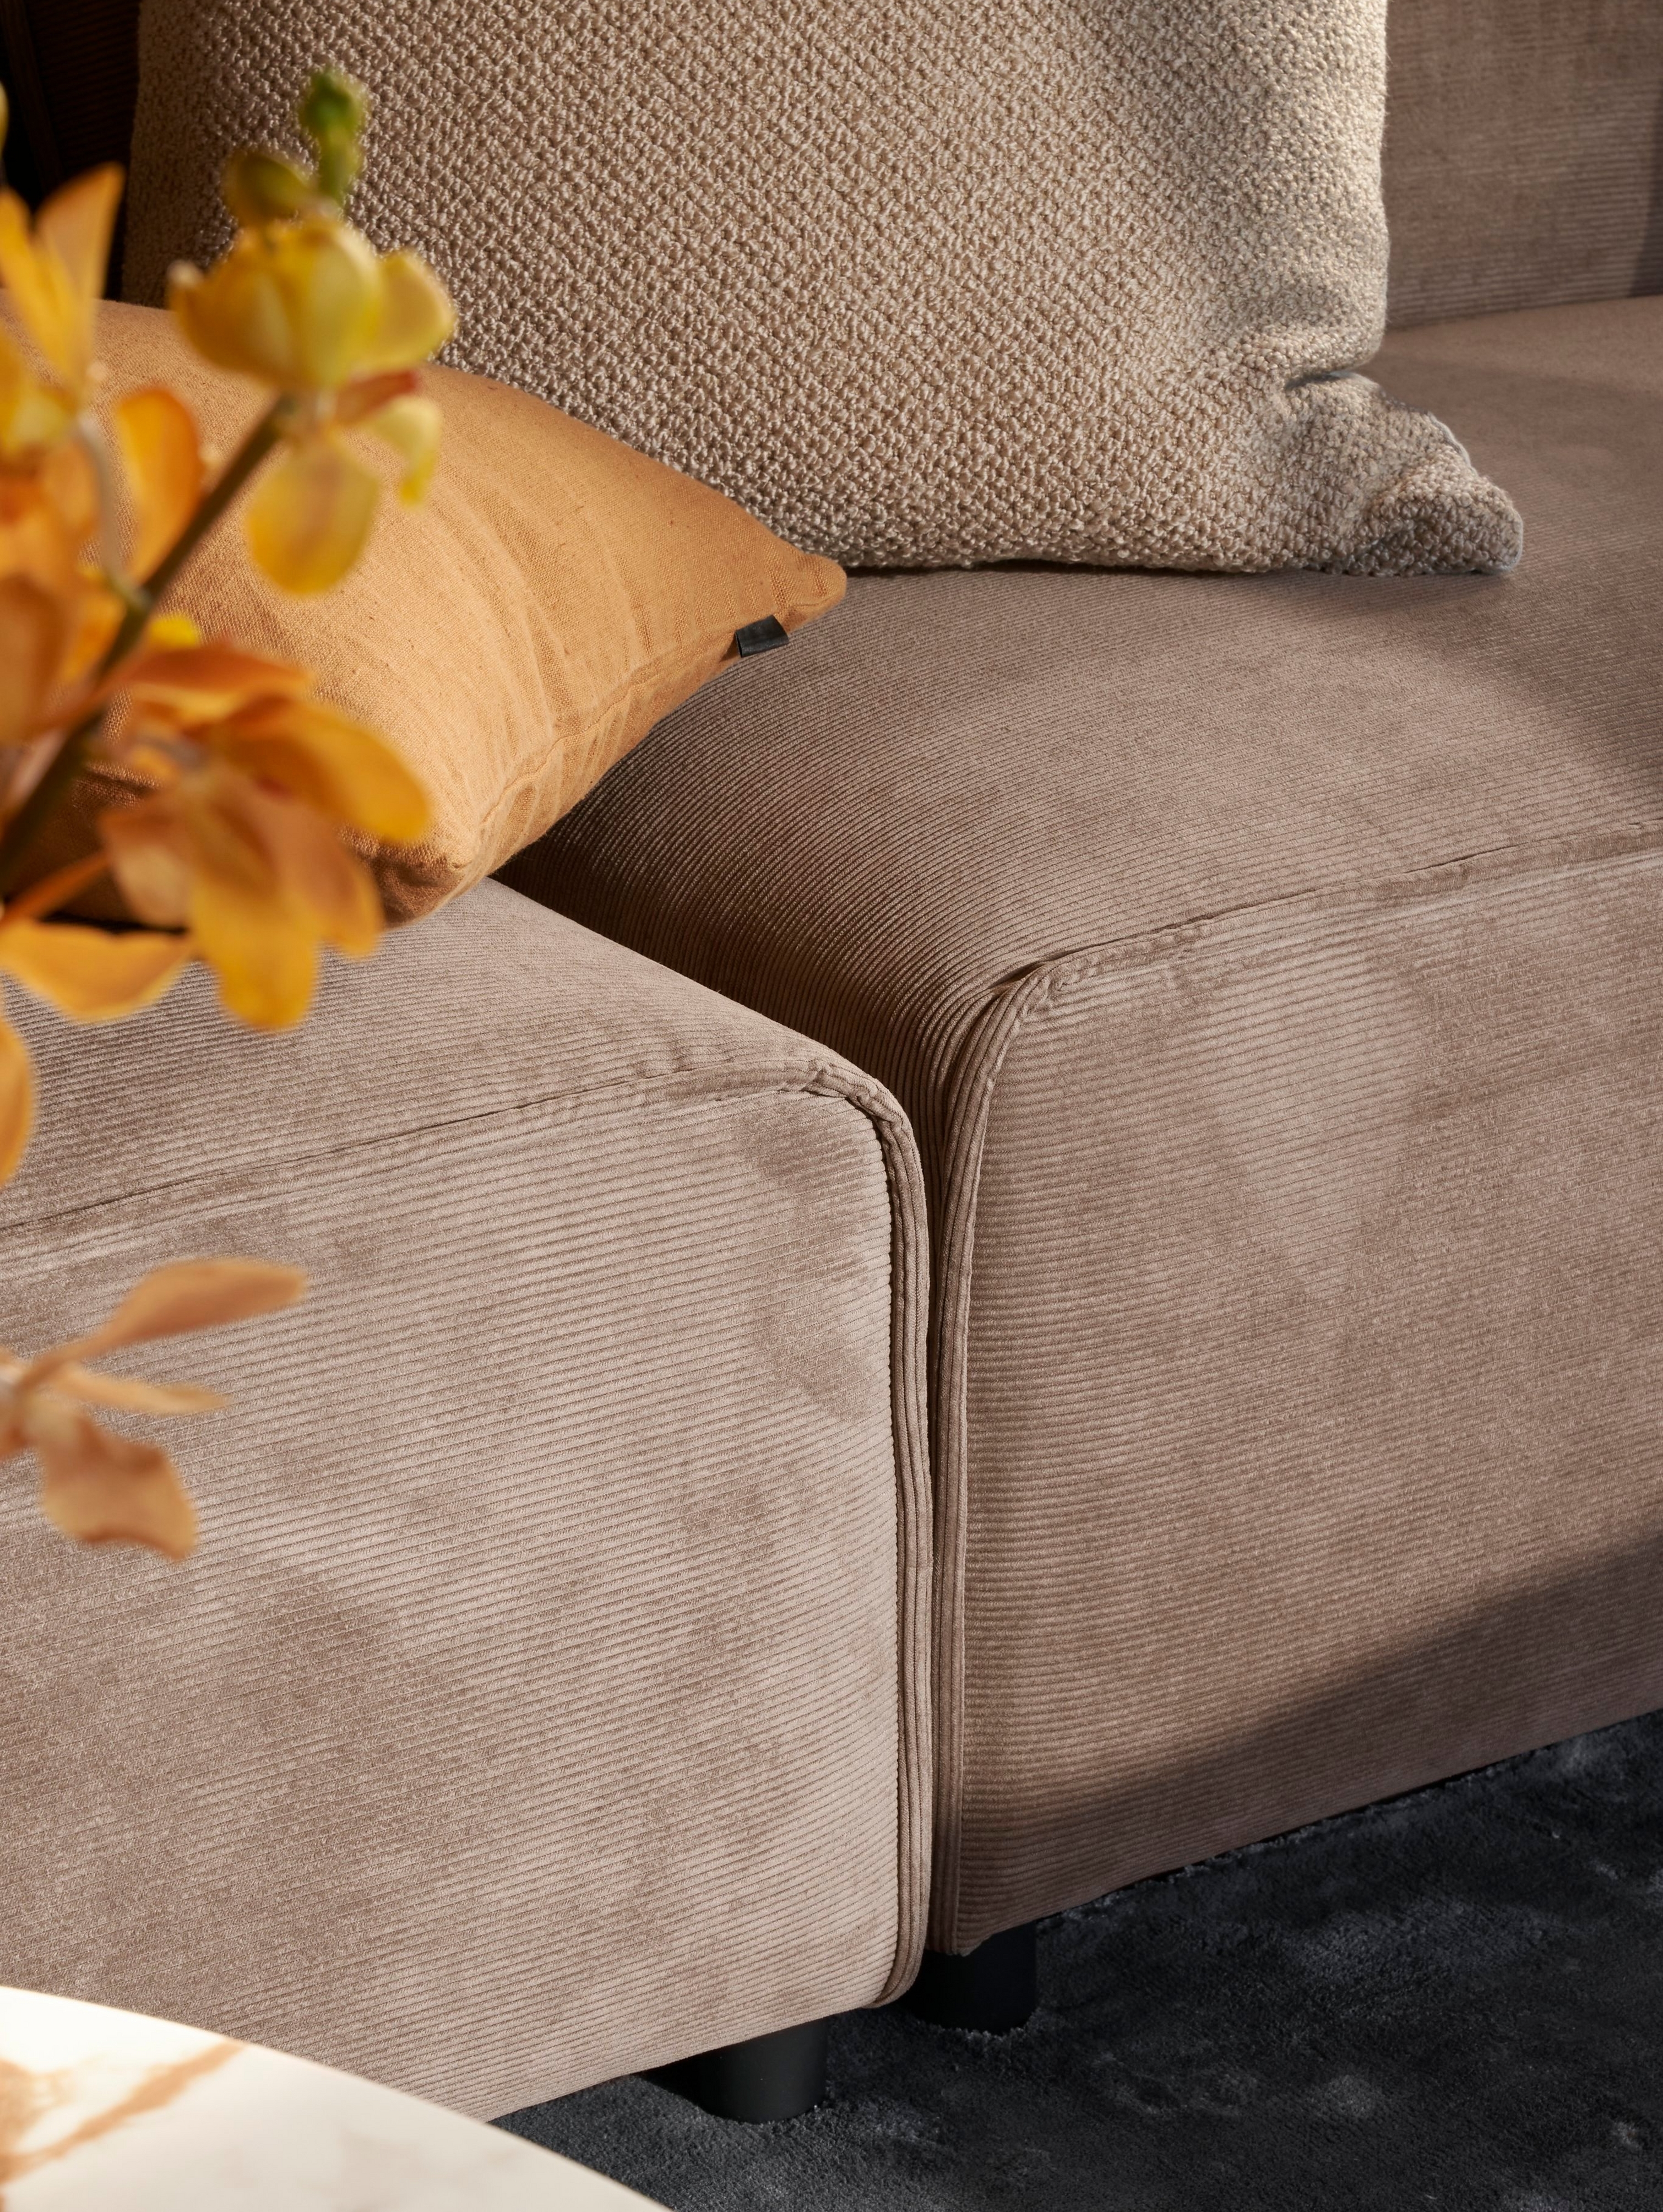 The Carmo sofa with its oversized seats for comfortable sitting.